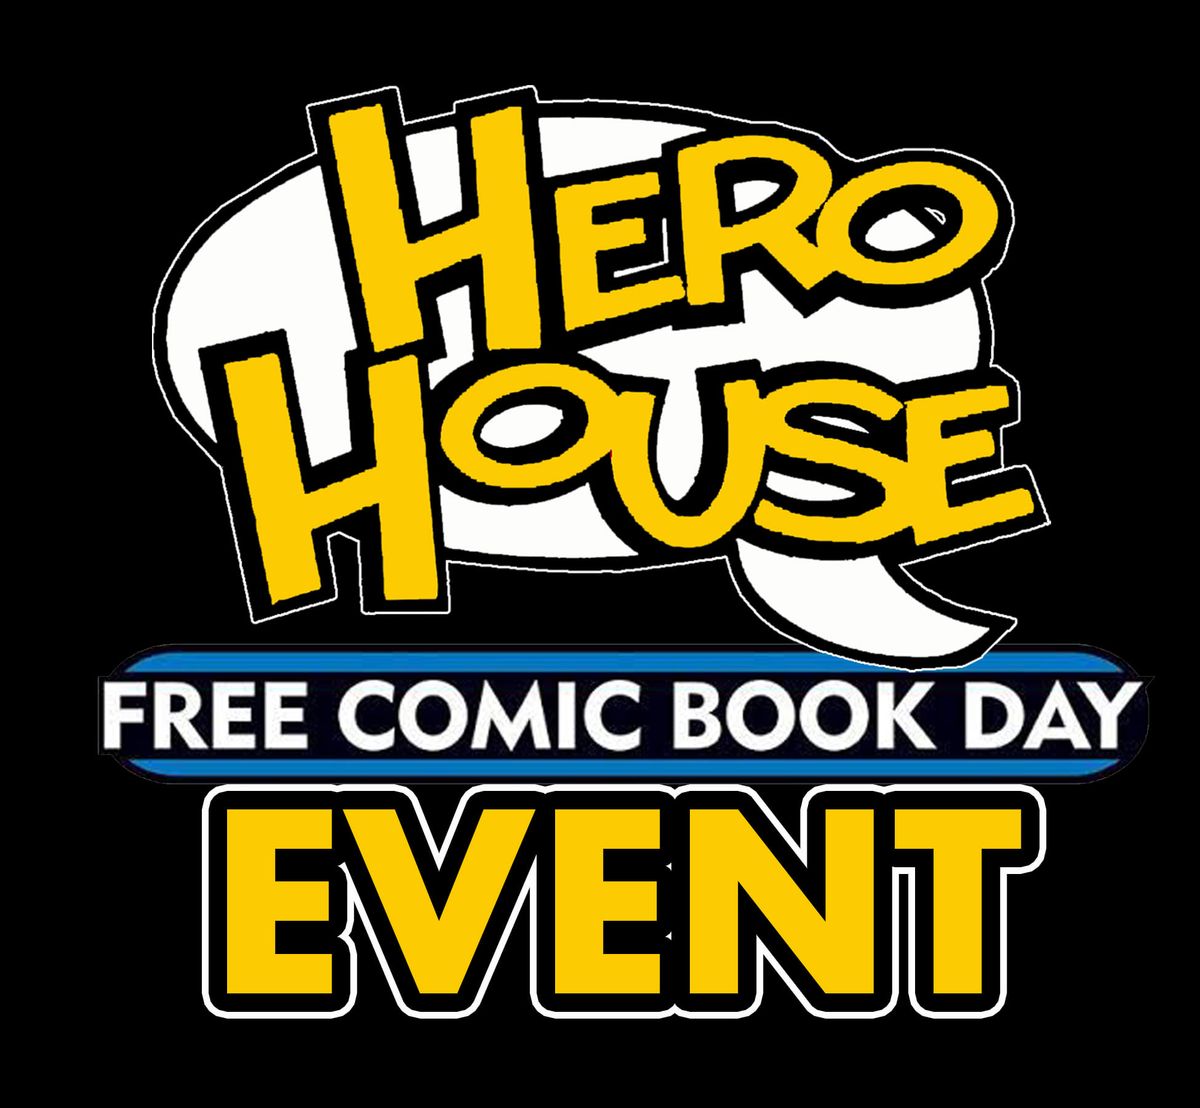 FREE COMIC BOOK DAY at HERO HOUSE